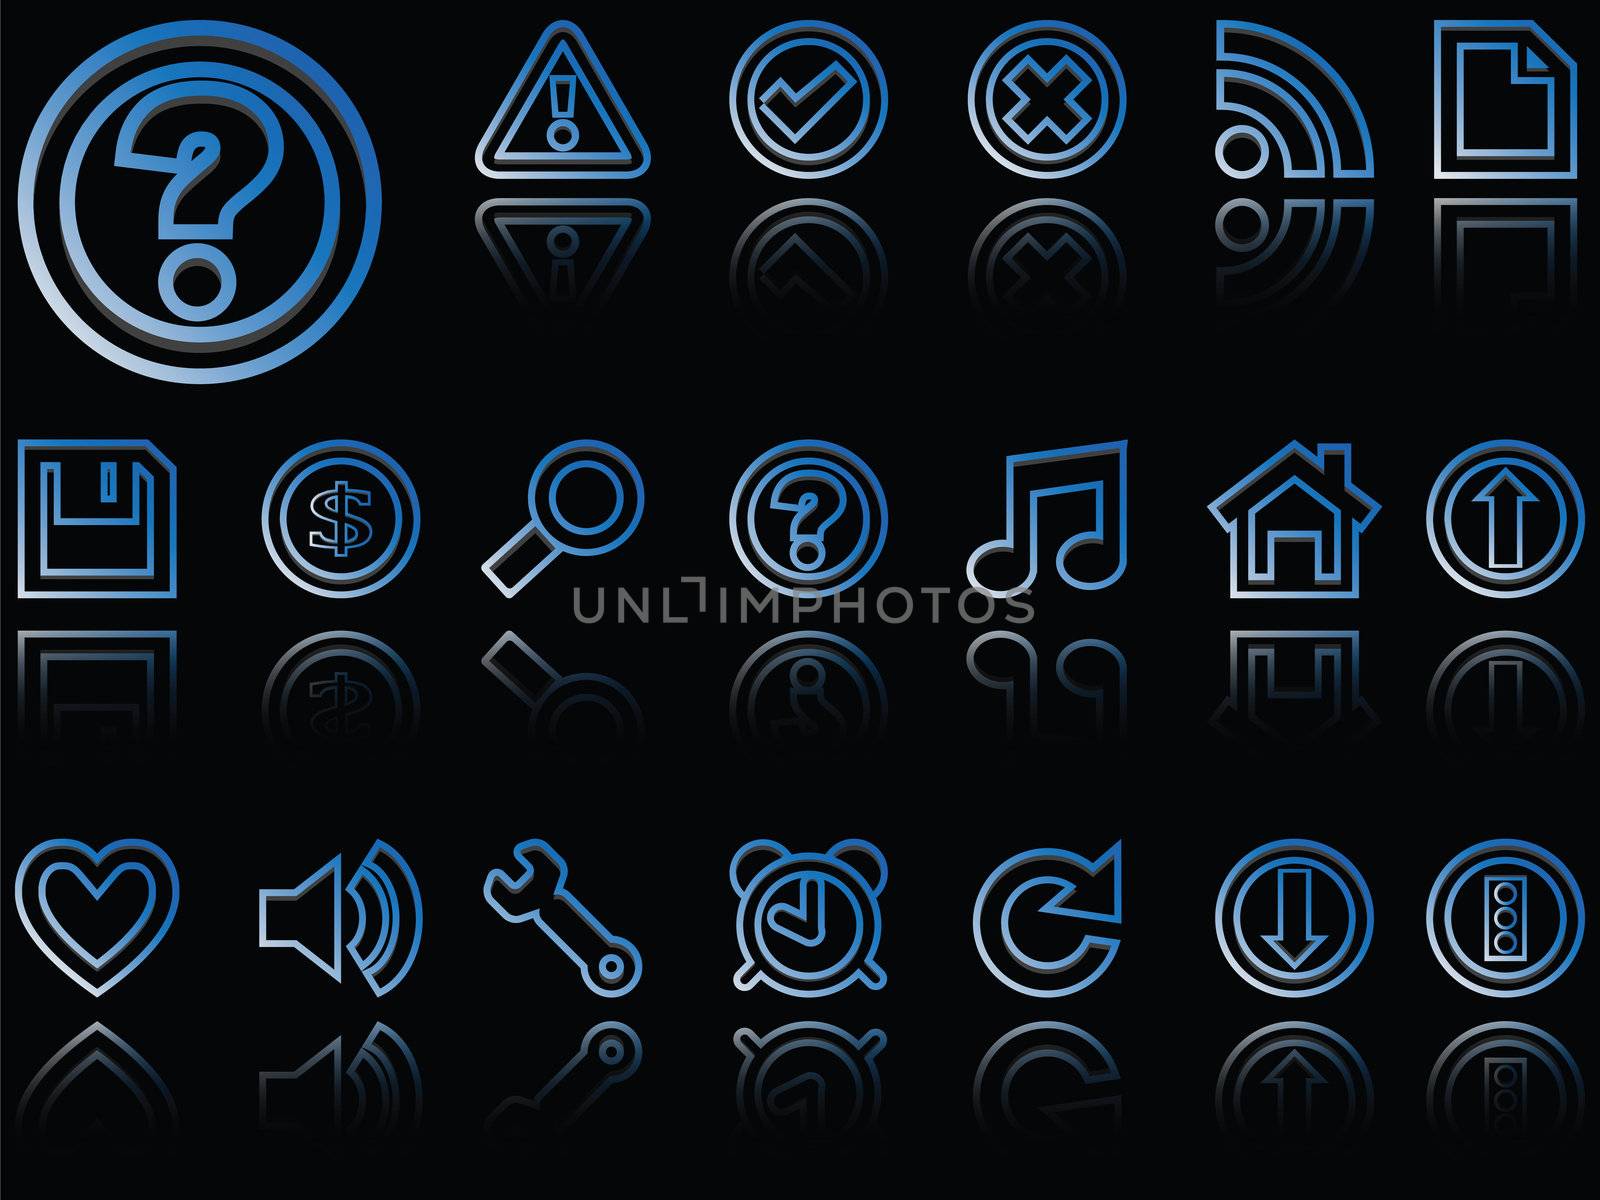 web icons reflected against black background, abstract vector art illustration